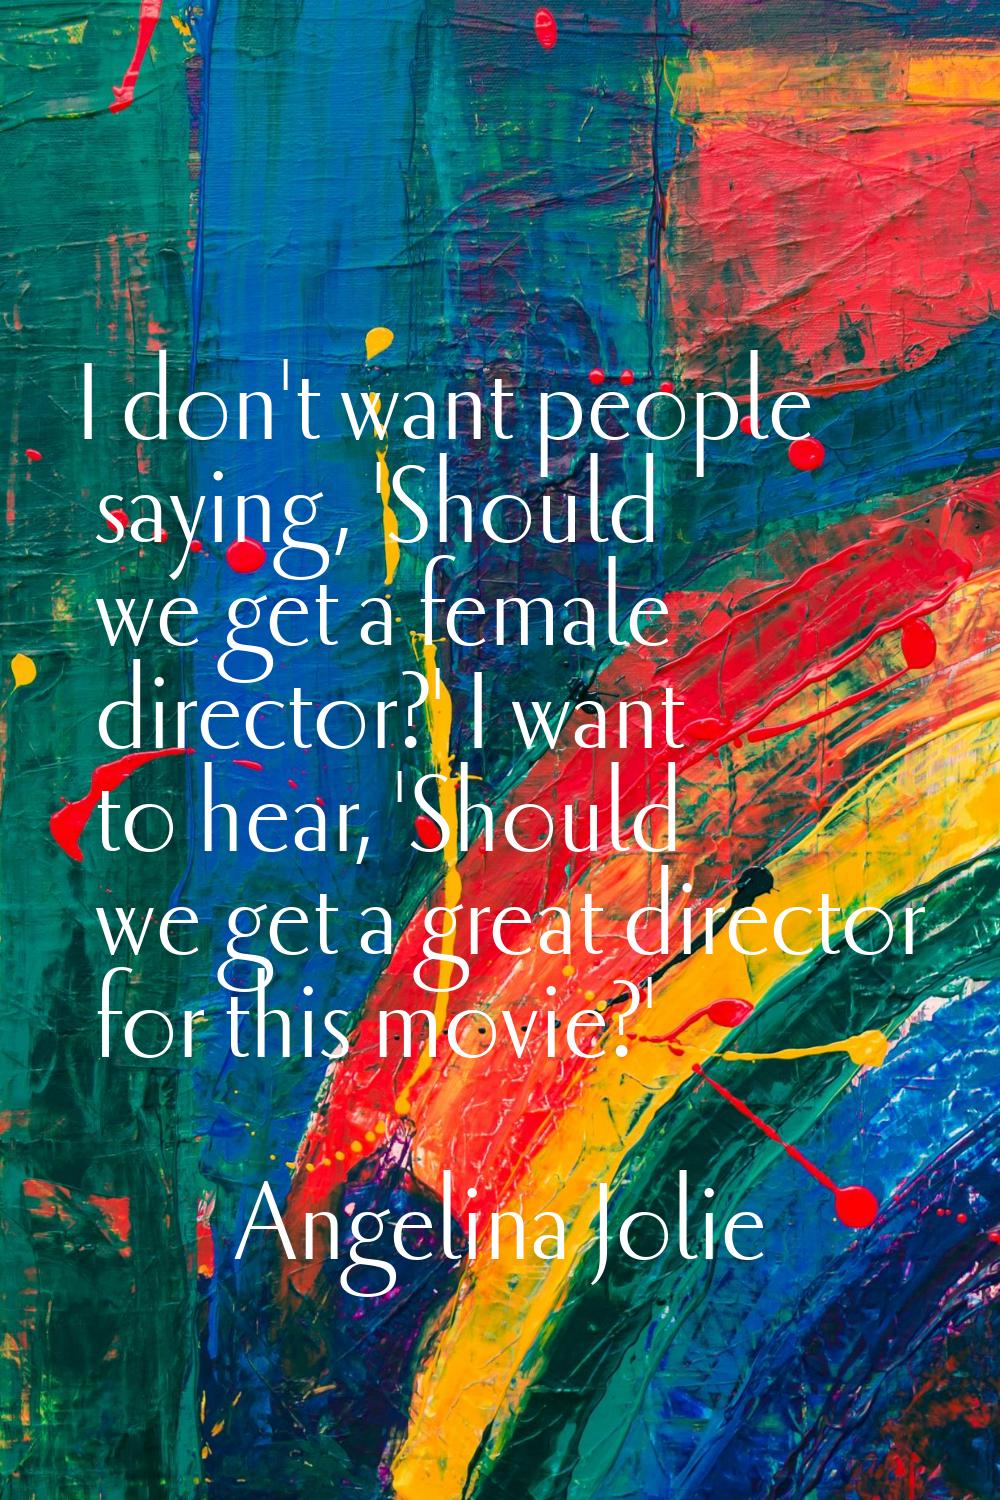 I don't want people saying, 'Should we get a female director?' I want to hear, 'Should we get a gre